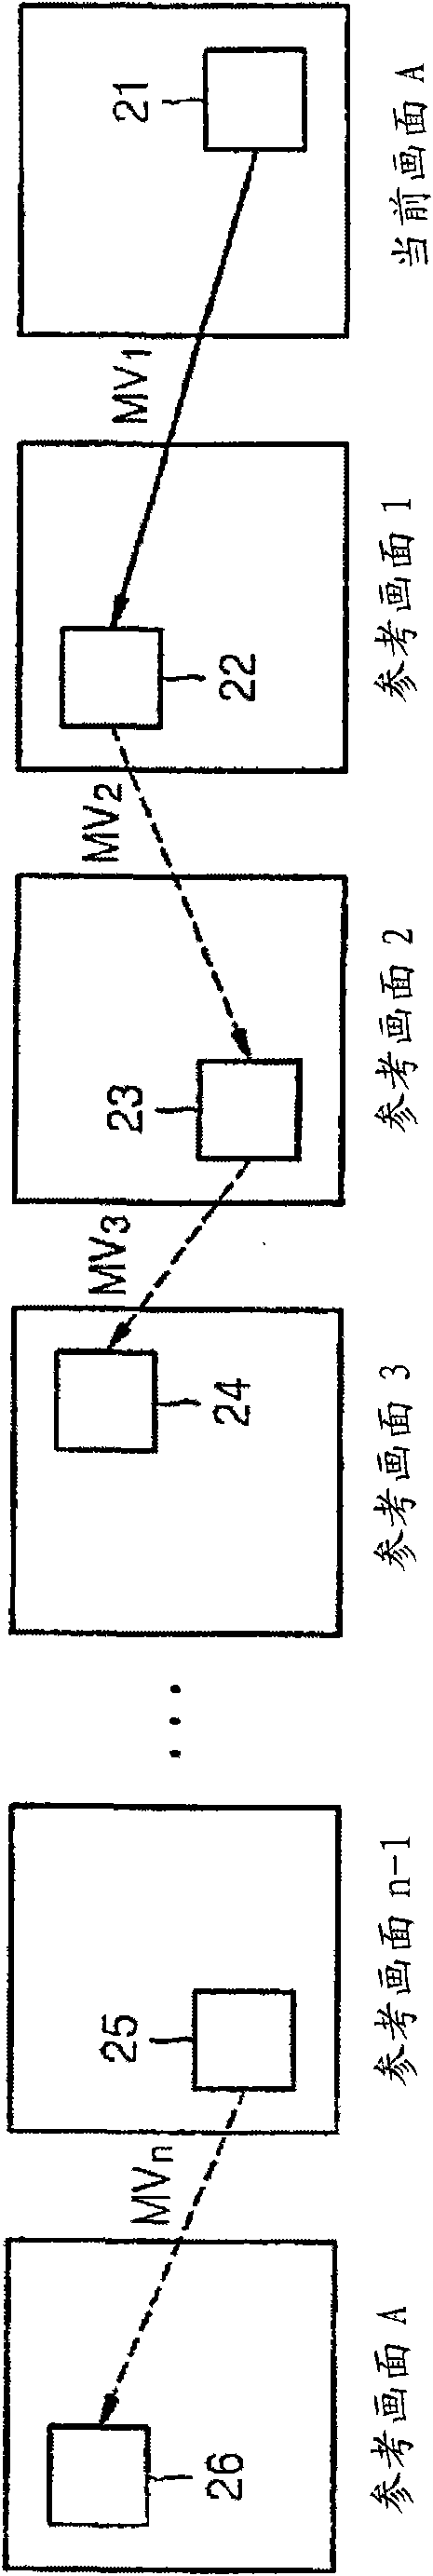 Method and apparatus for encoding/decoding image using motion vector tracking